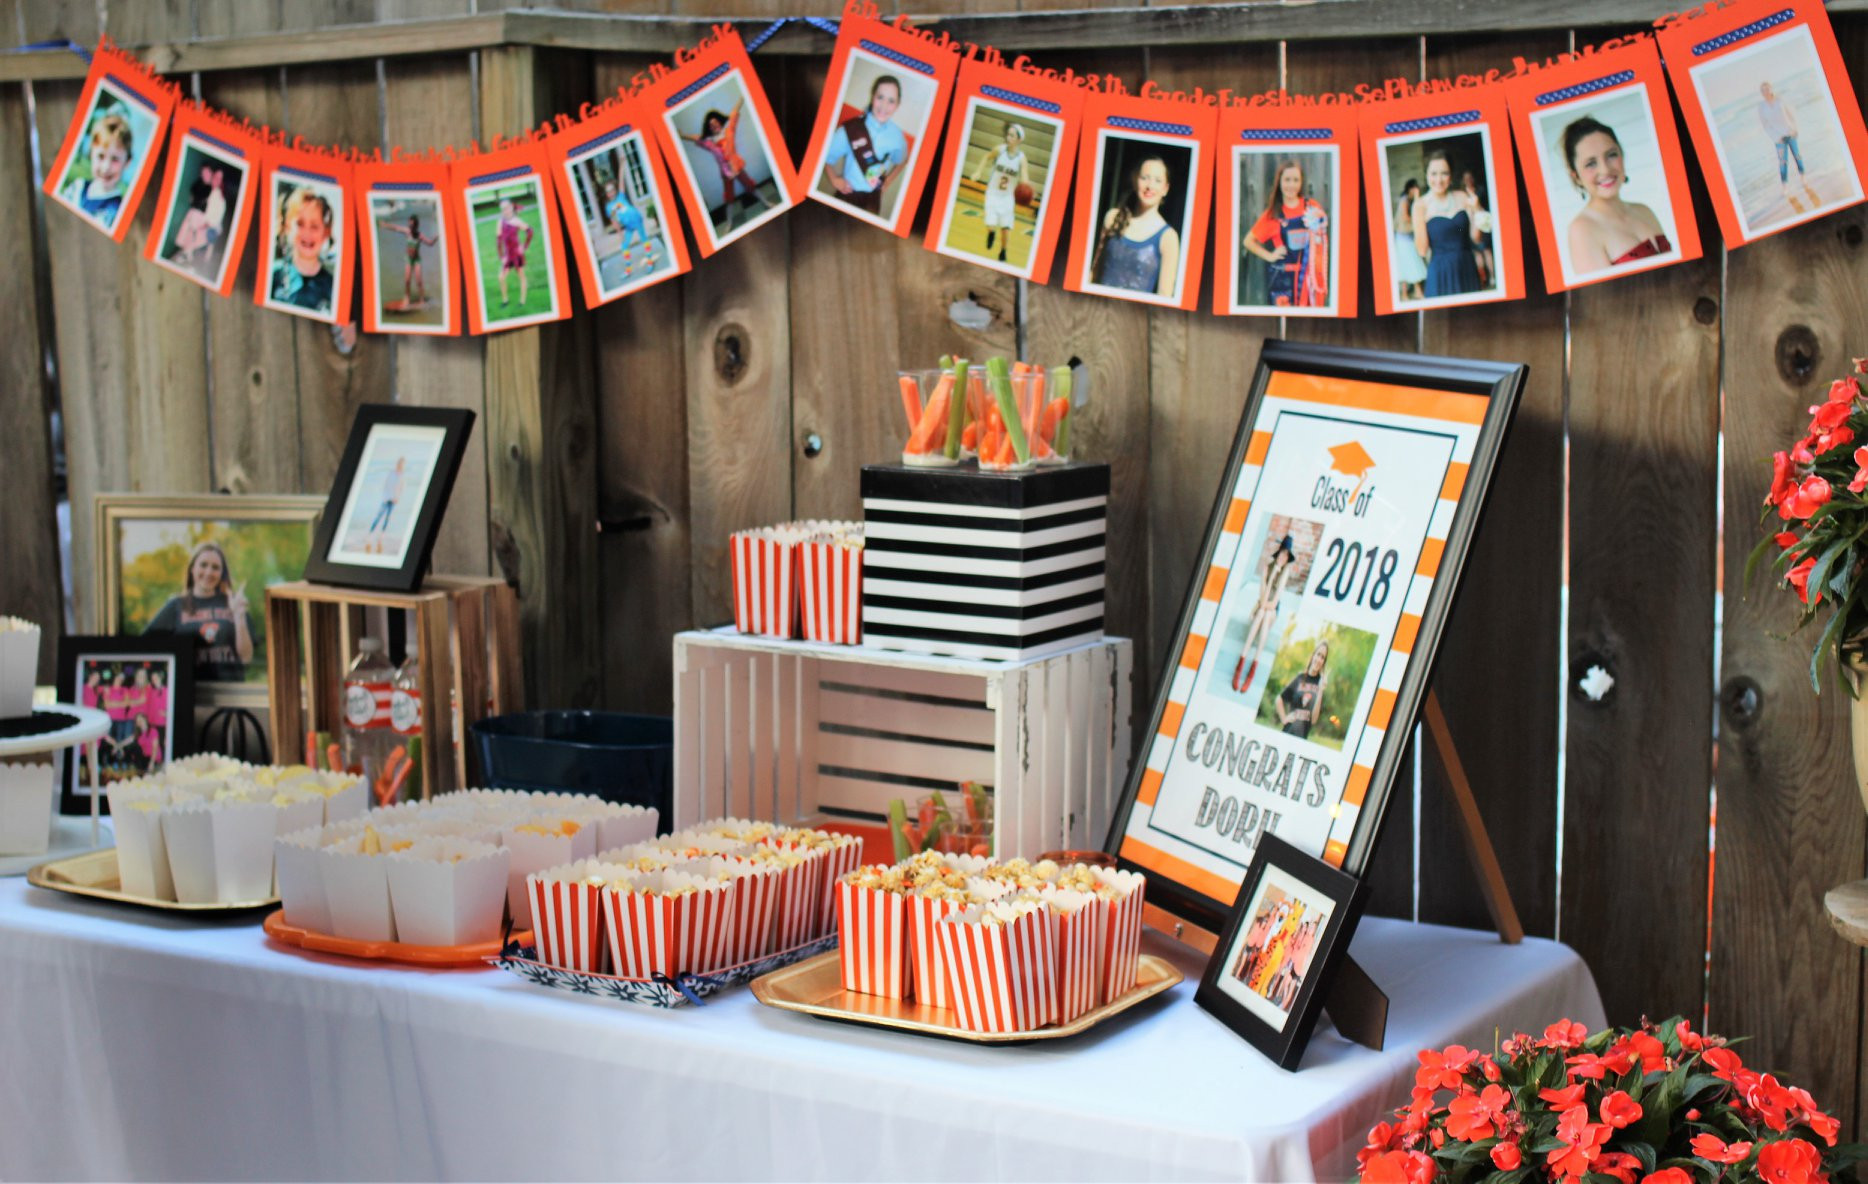 Hs Graduation Party Ideas
 Graduation Party Ideas How to Celebrate Your Senior s Big Day